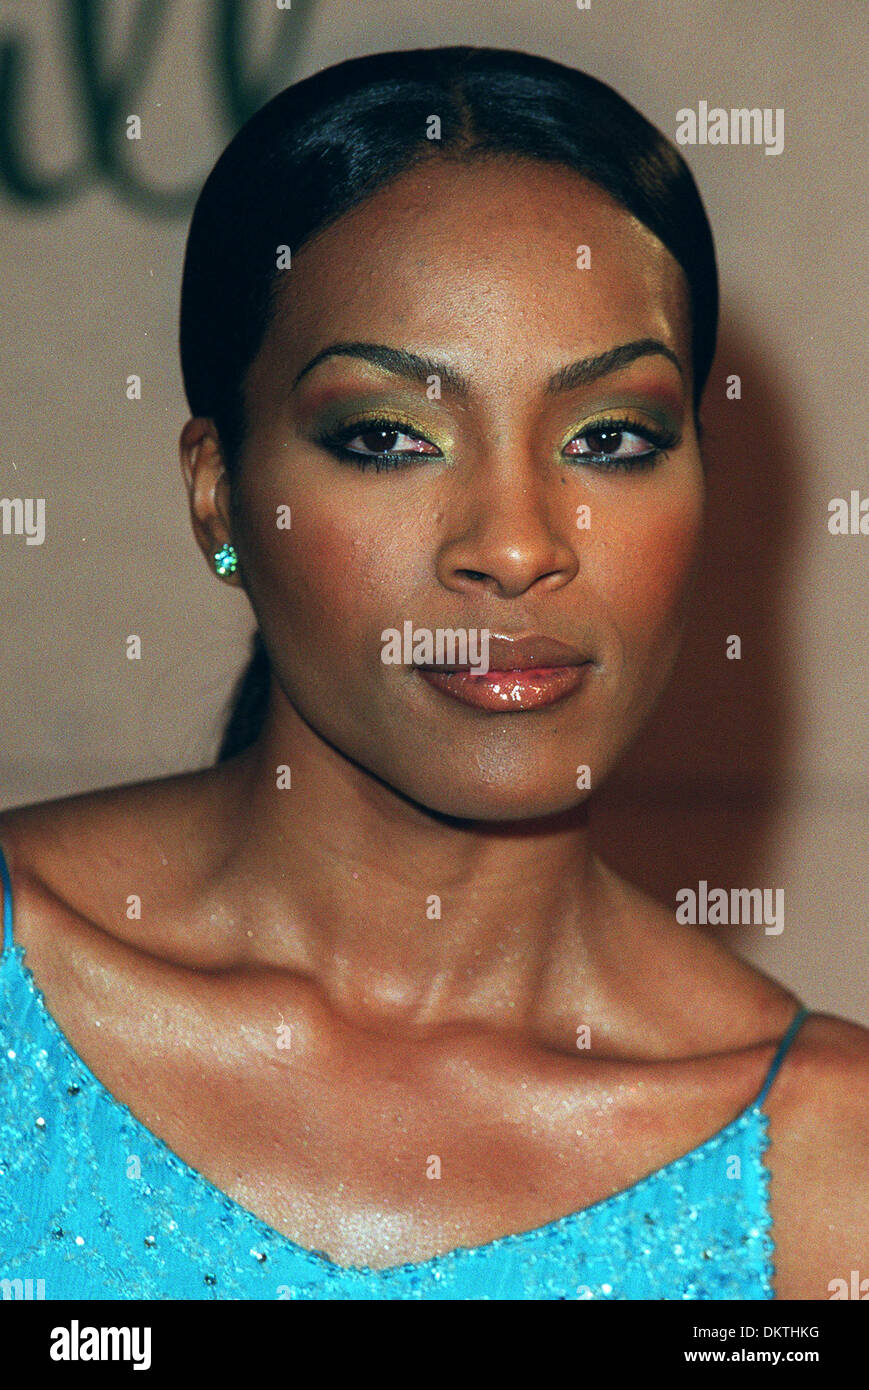 Nona Gaye High Resolution Stock Photography And Images Alamy.